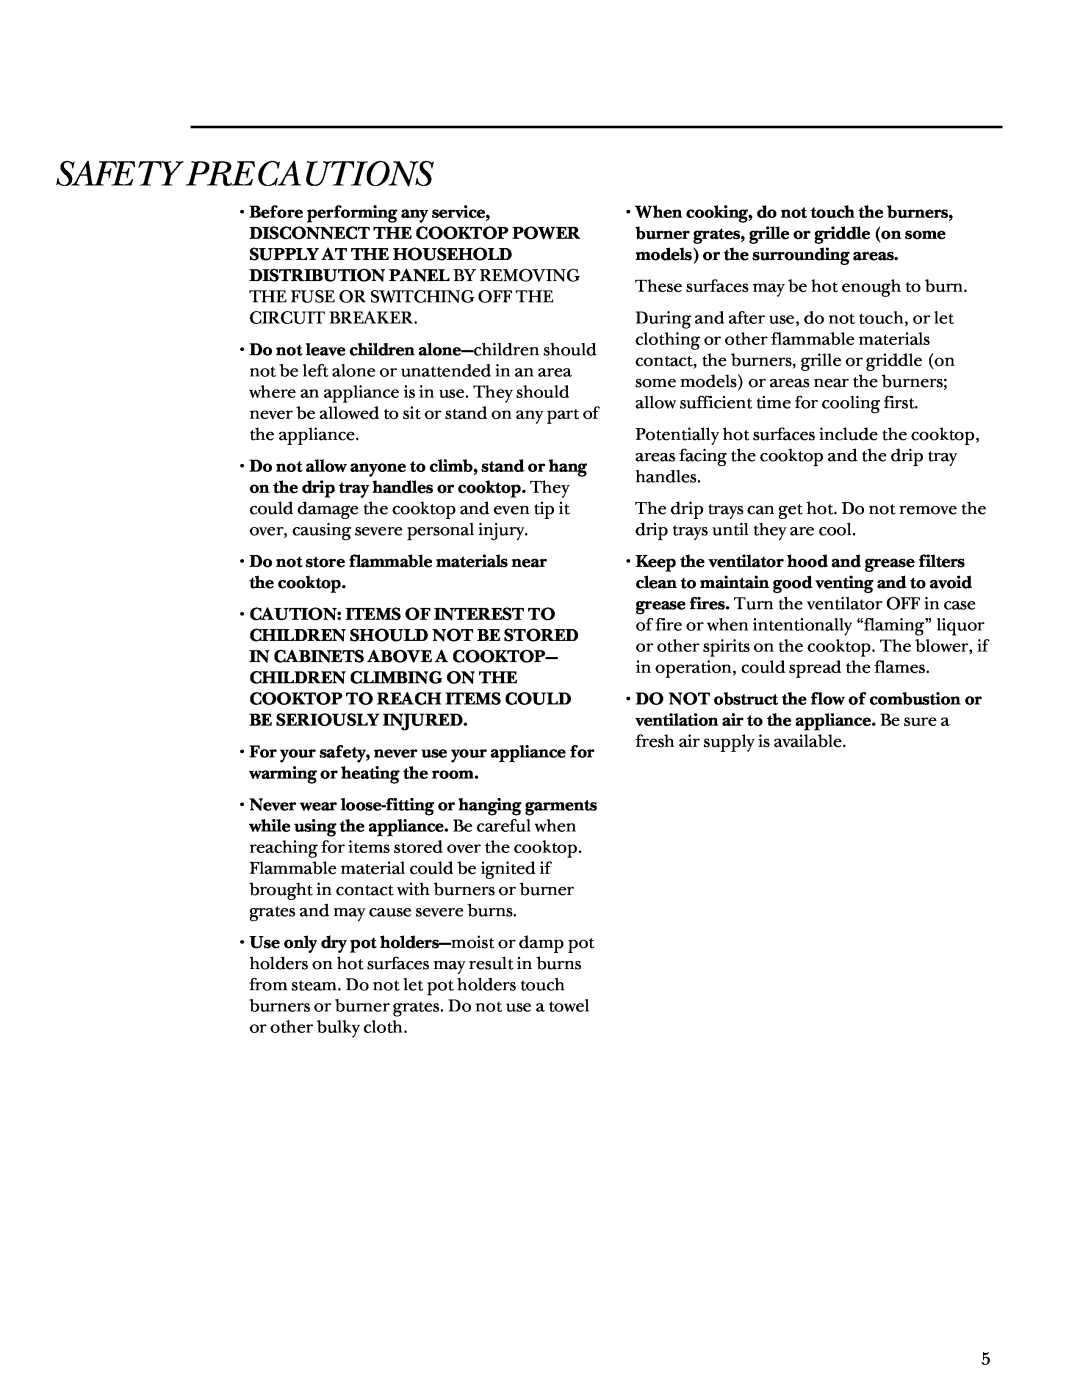 GE Monogram 164D3333P027 manual Safety Precautions, Before performing any service 